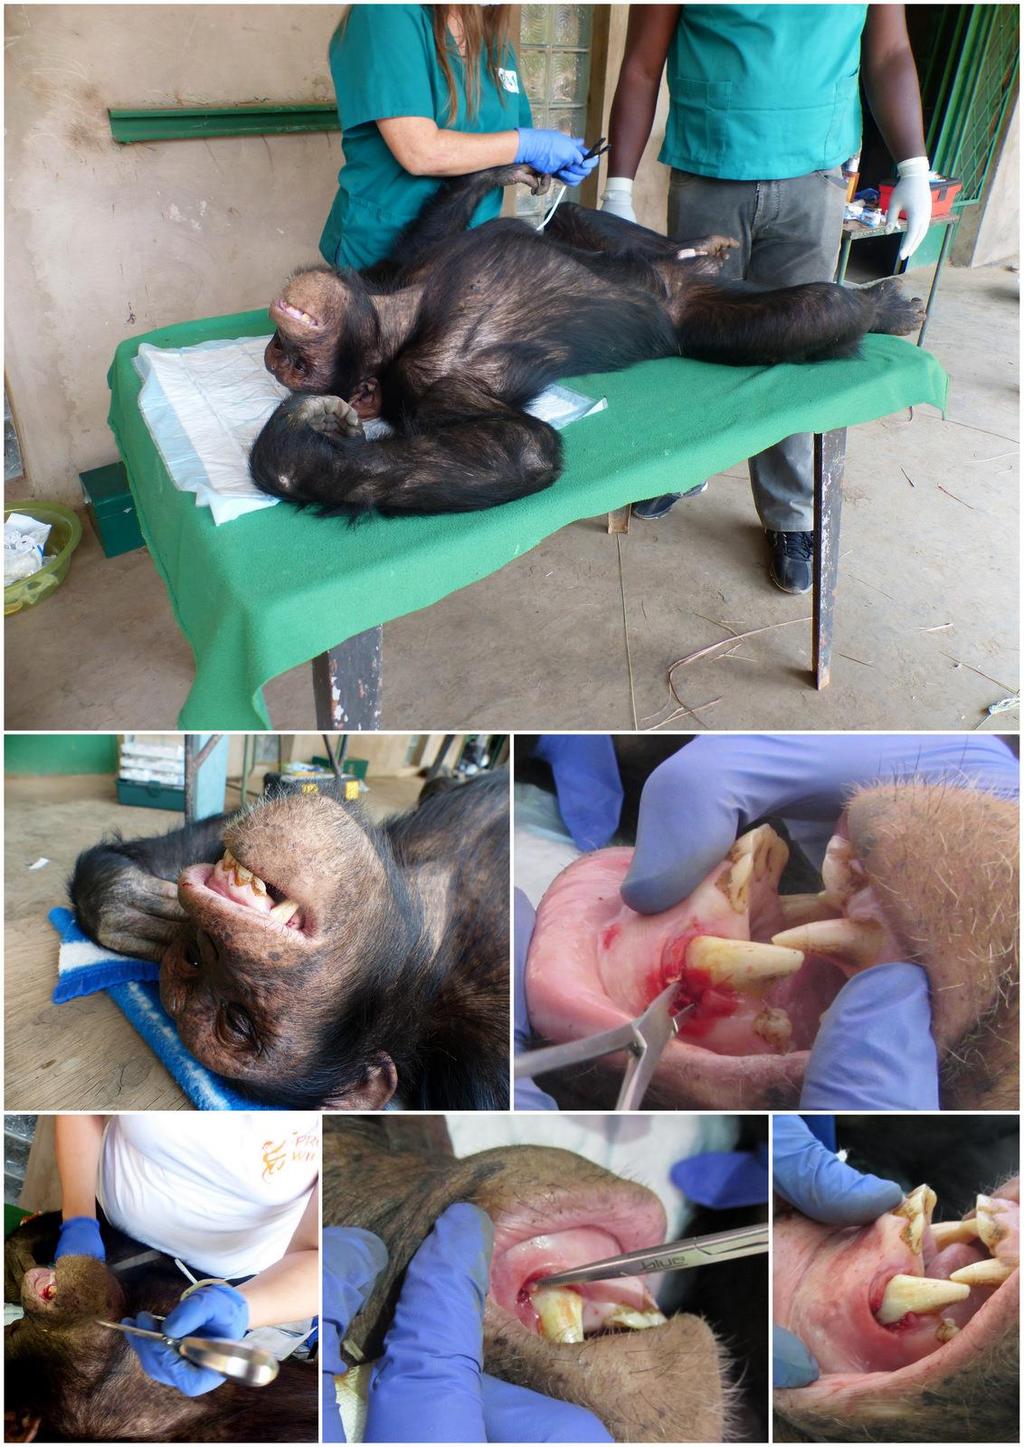 2/ PASA, a male of about 10 years old, had teeth issues and his face had recently swollen so badly he could hardly eat Dr Ainare checked the upper right canine whose tooth gum was red and irritated.